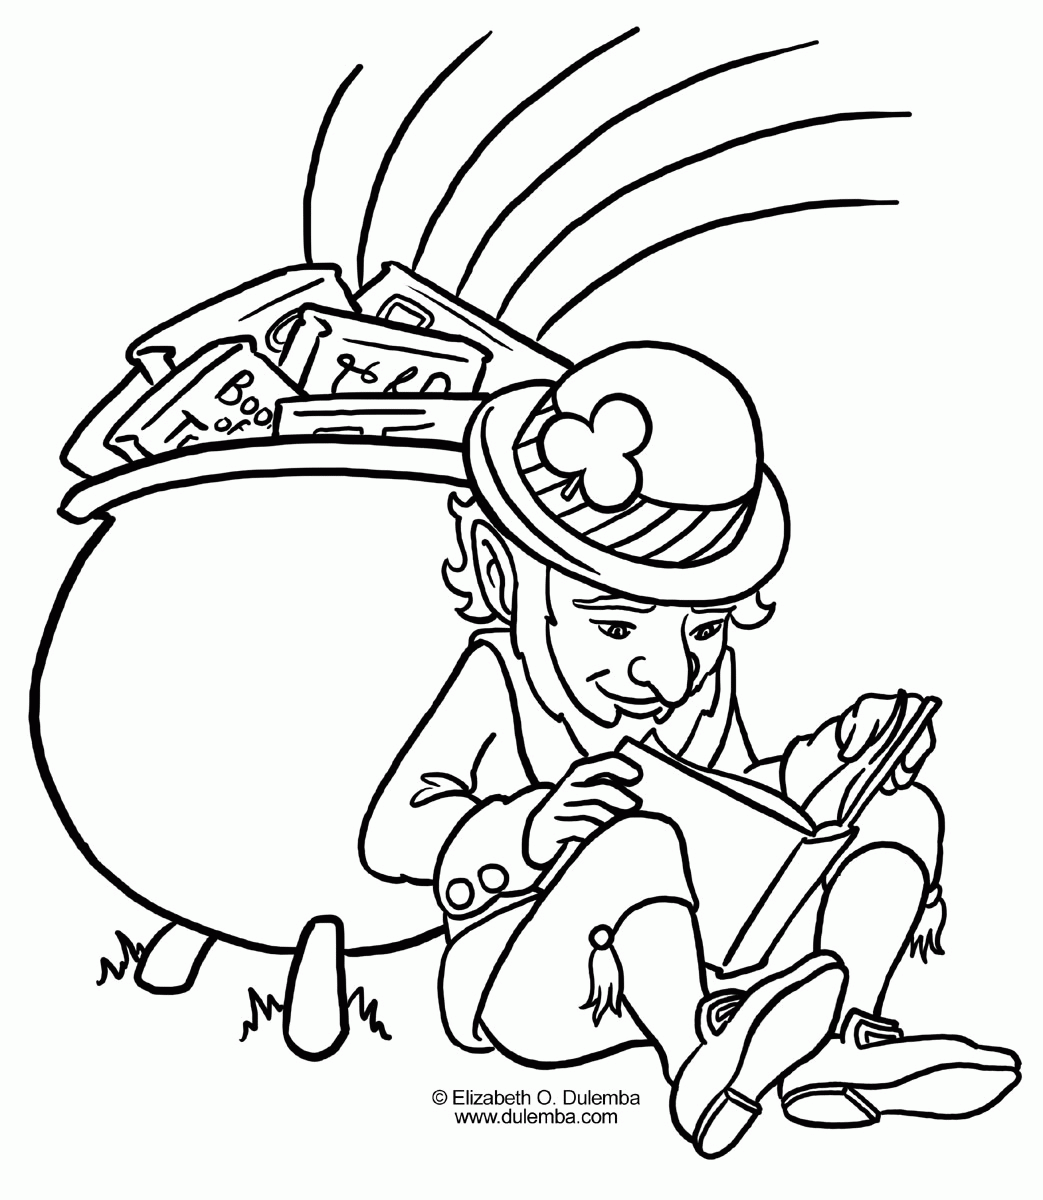 8 Pics of St. Patrick's Day Leprechaun Coloring Page 1.Red - St ...